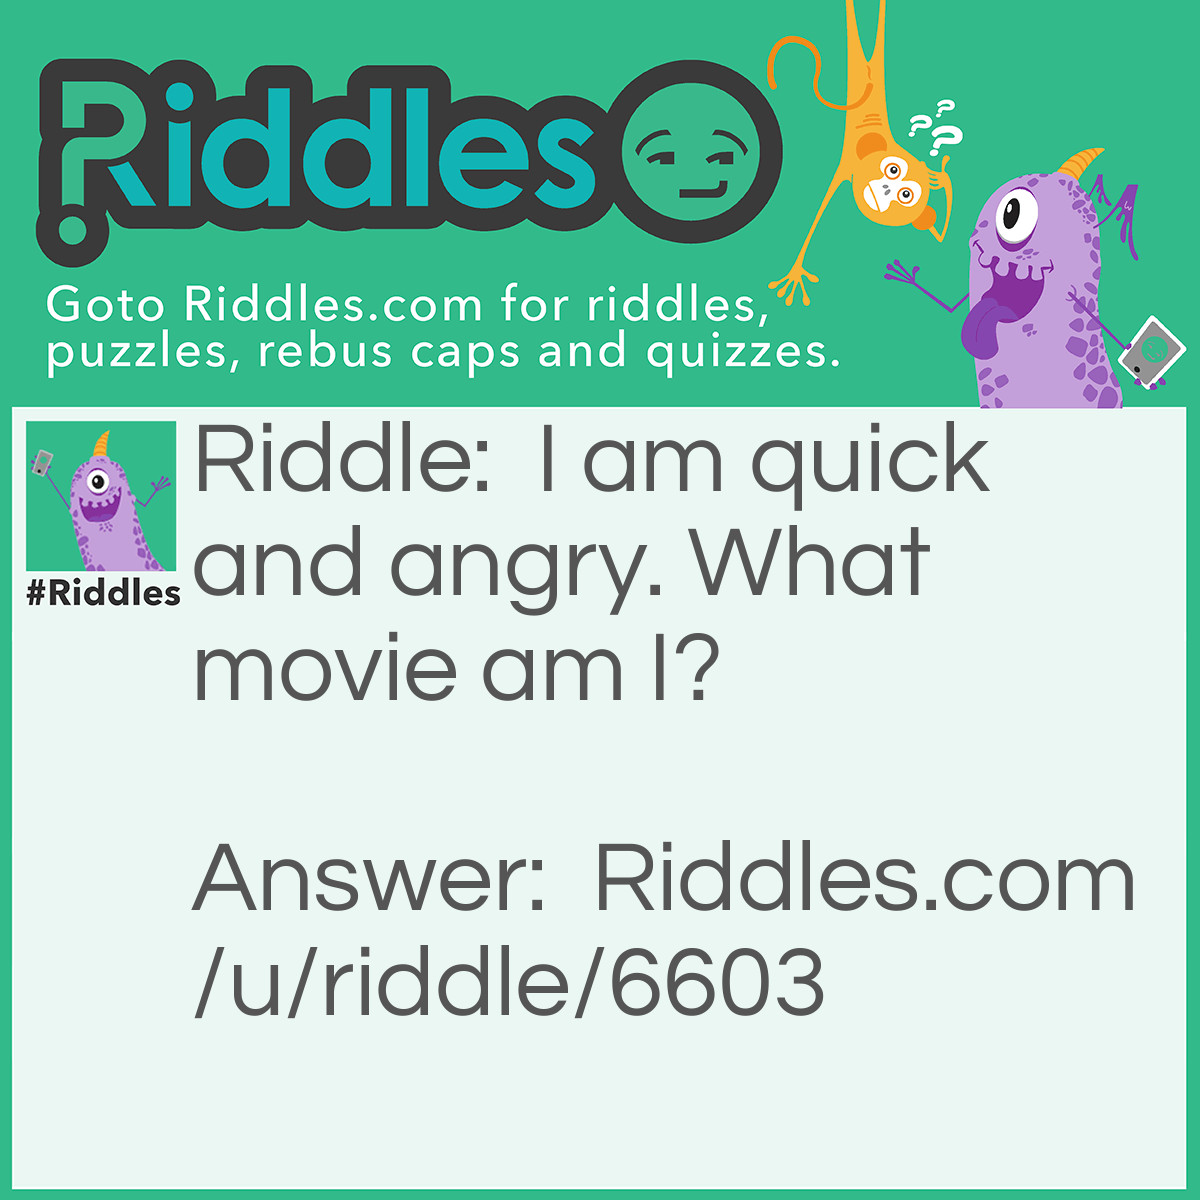 Riddle: I am quick and angry. What movie am I? Answer: Fast and furios.